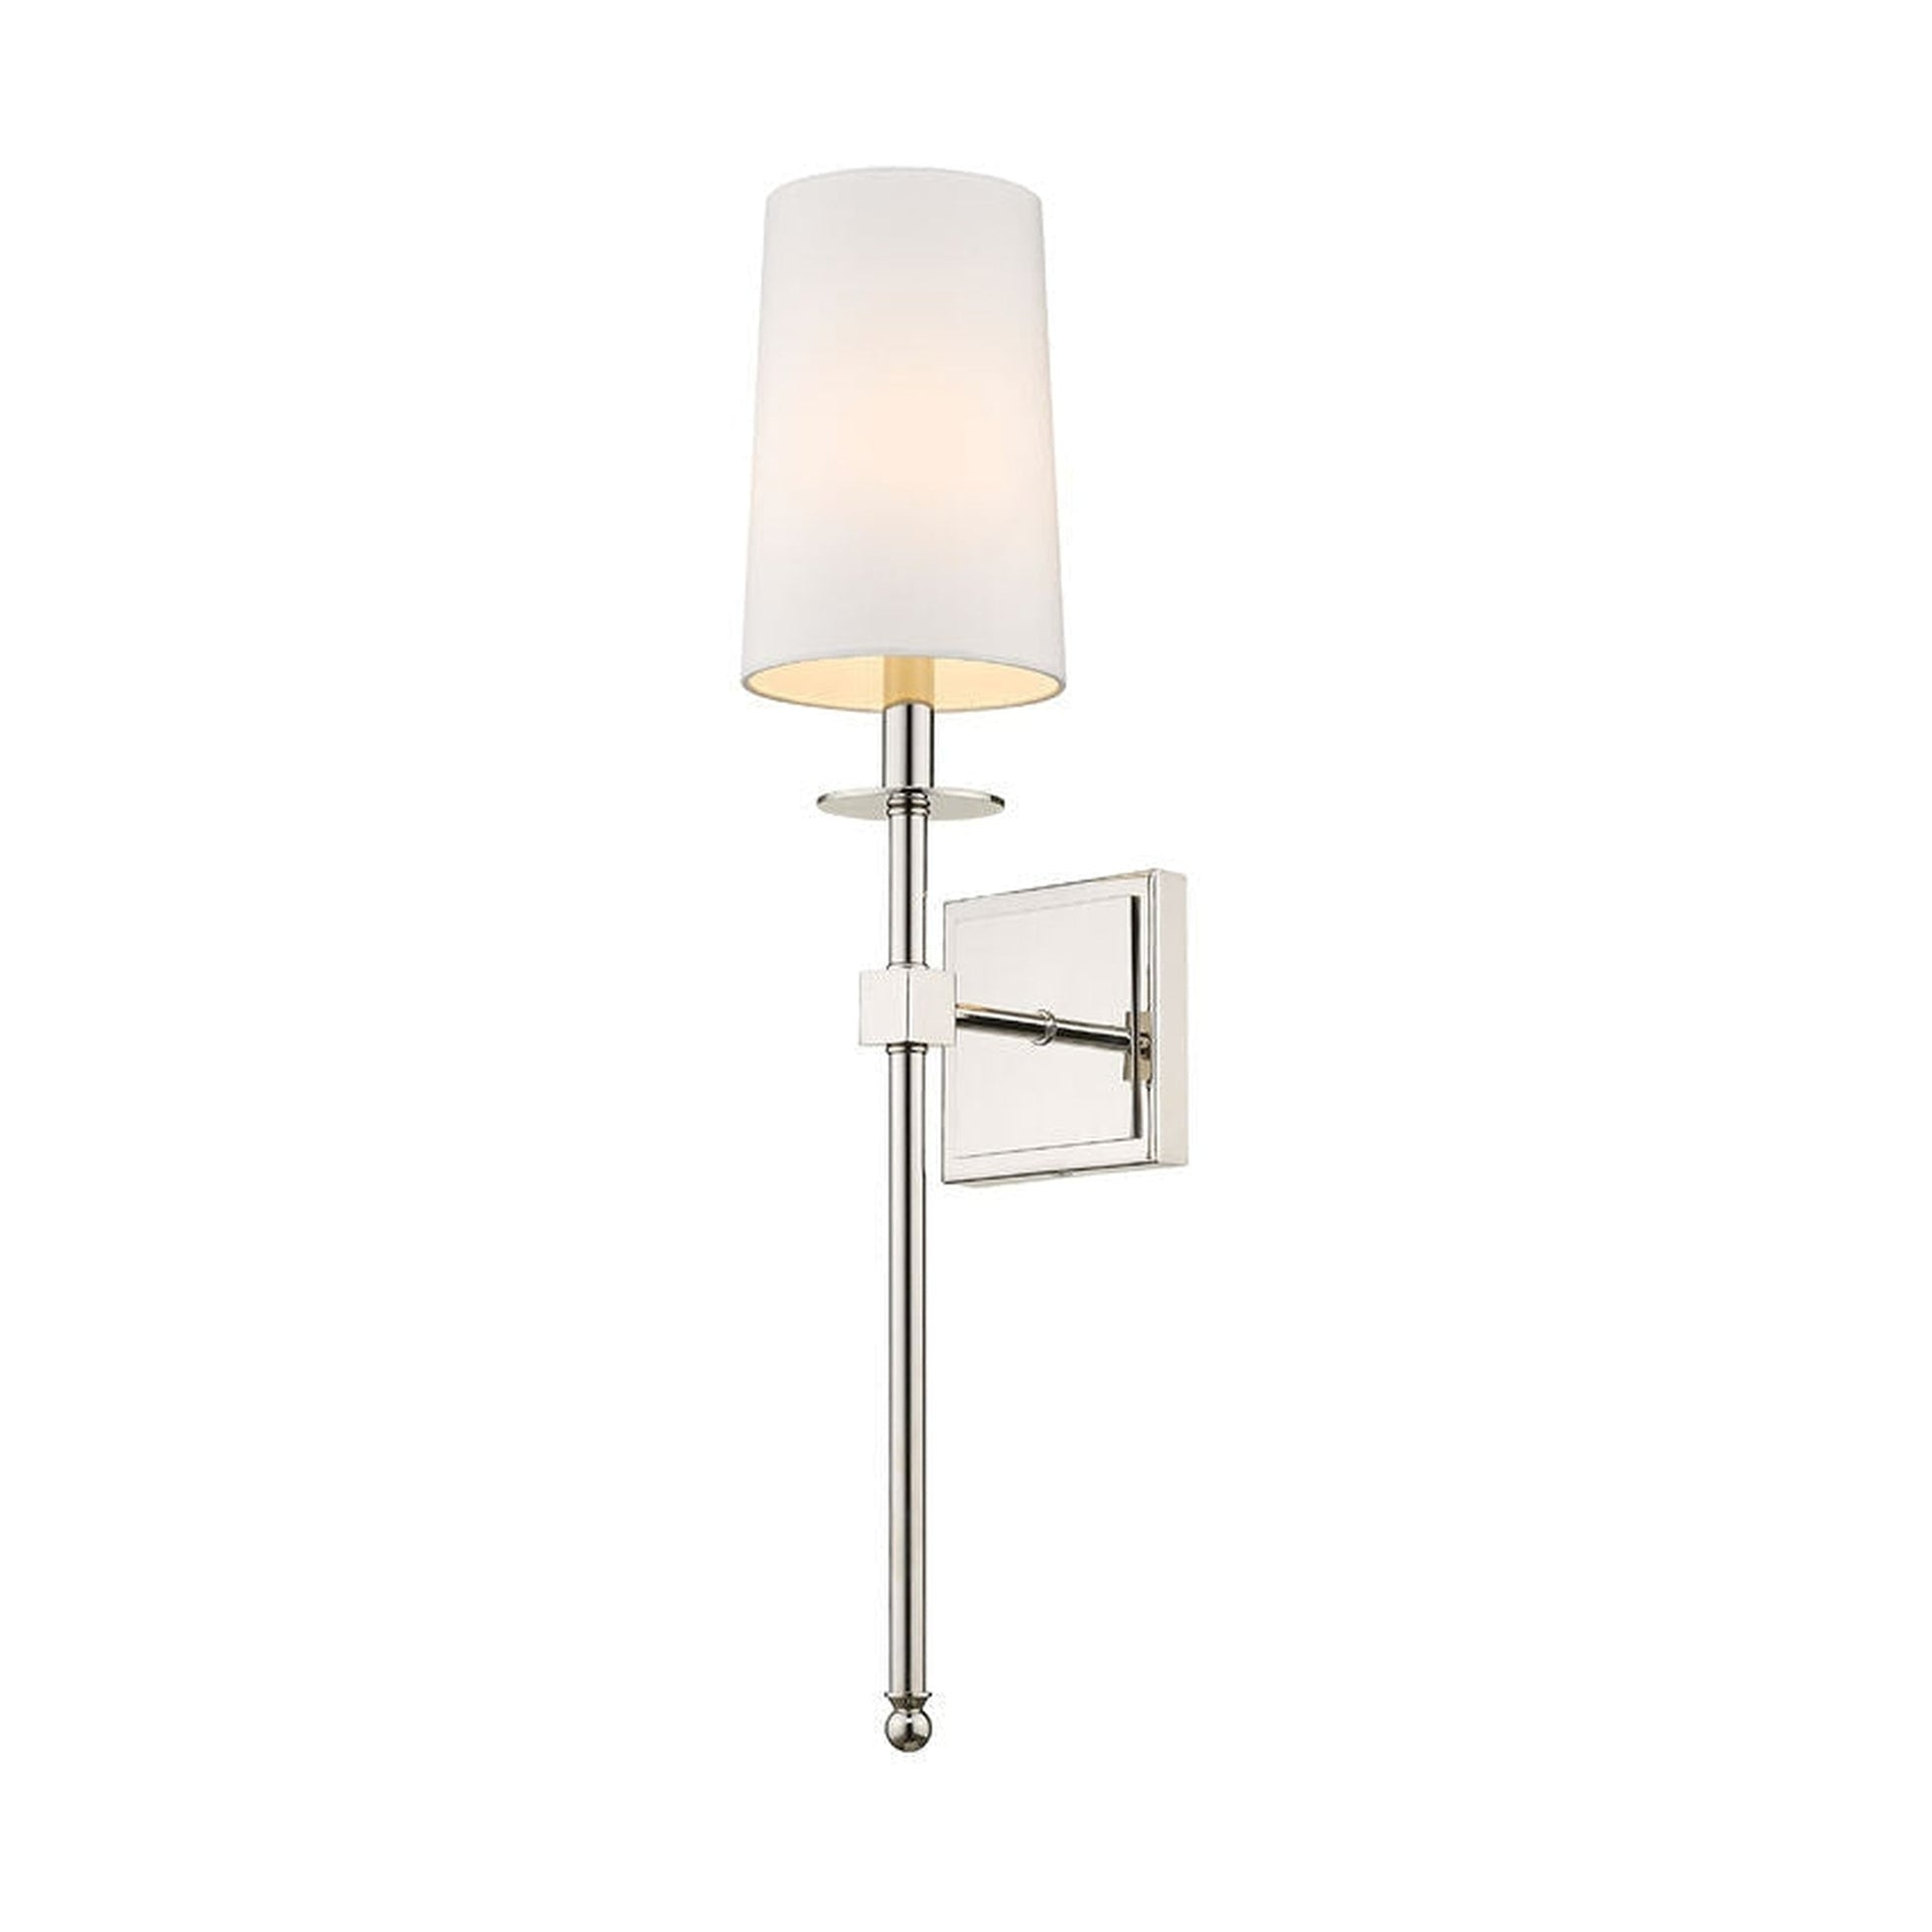 Z-Lite Camila 6" 1-Light Polished Nickel Wall Sconce With White Fabric Shade